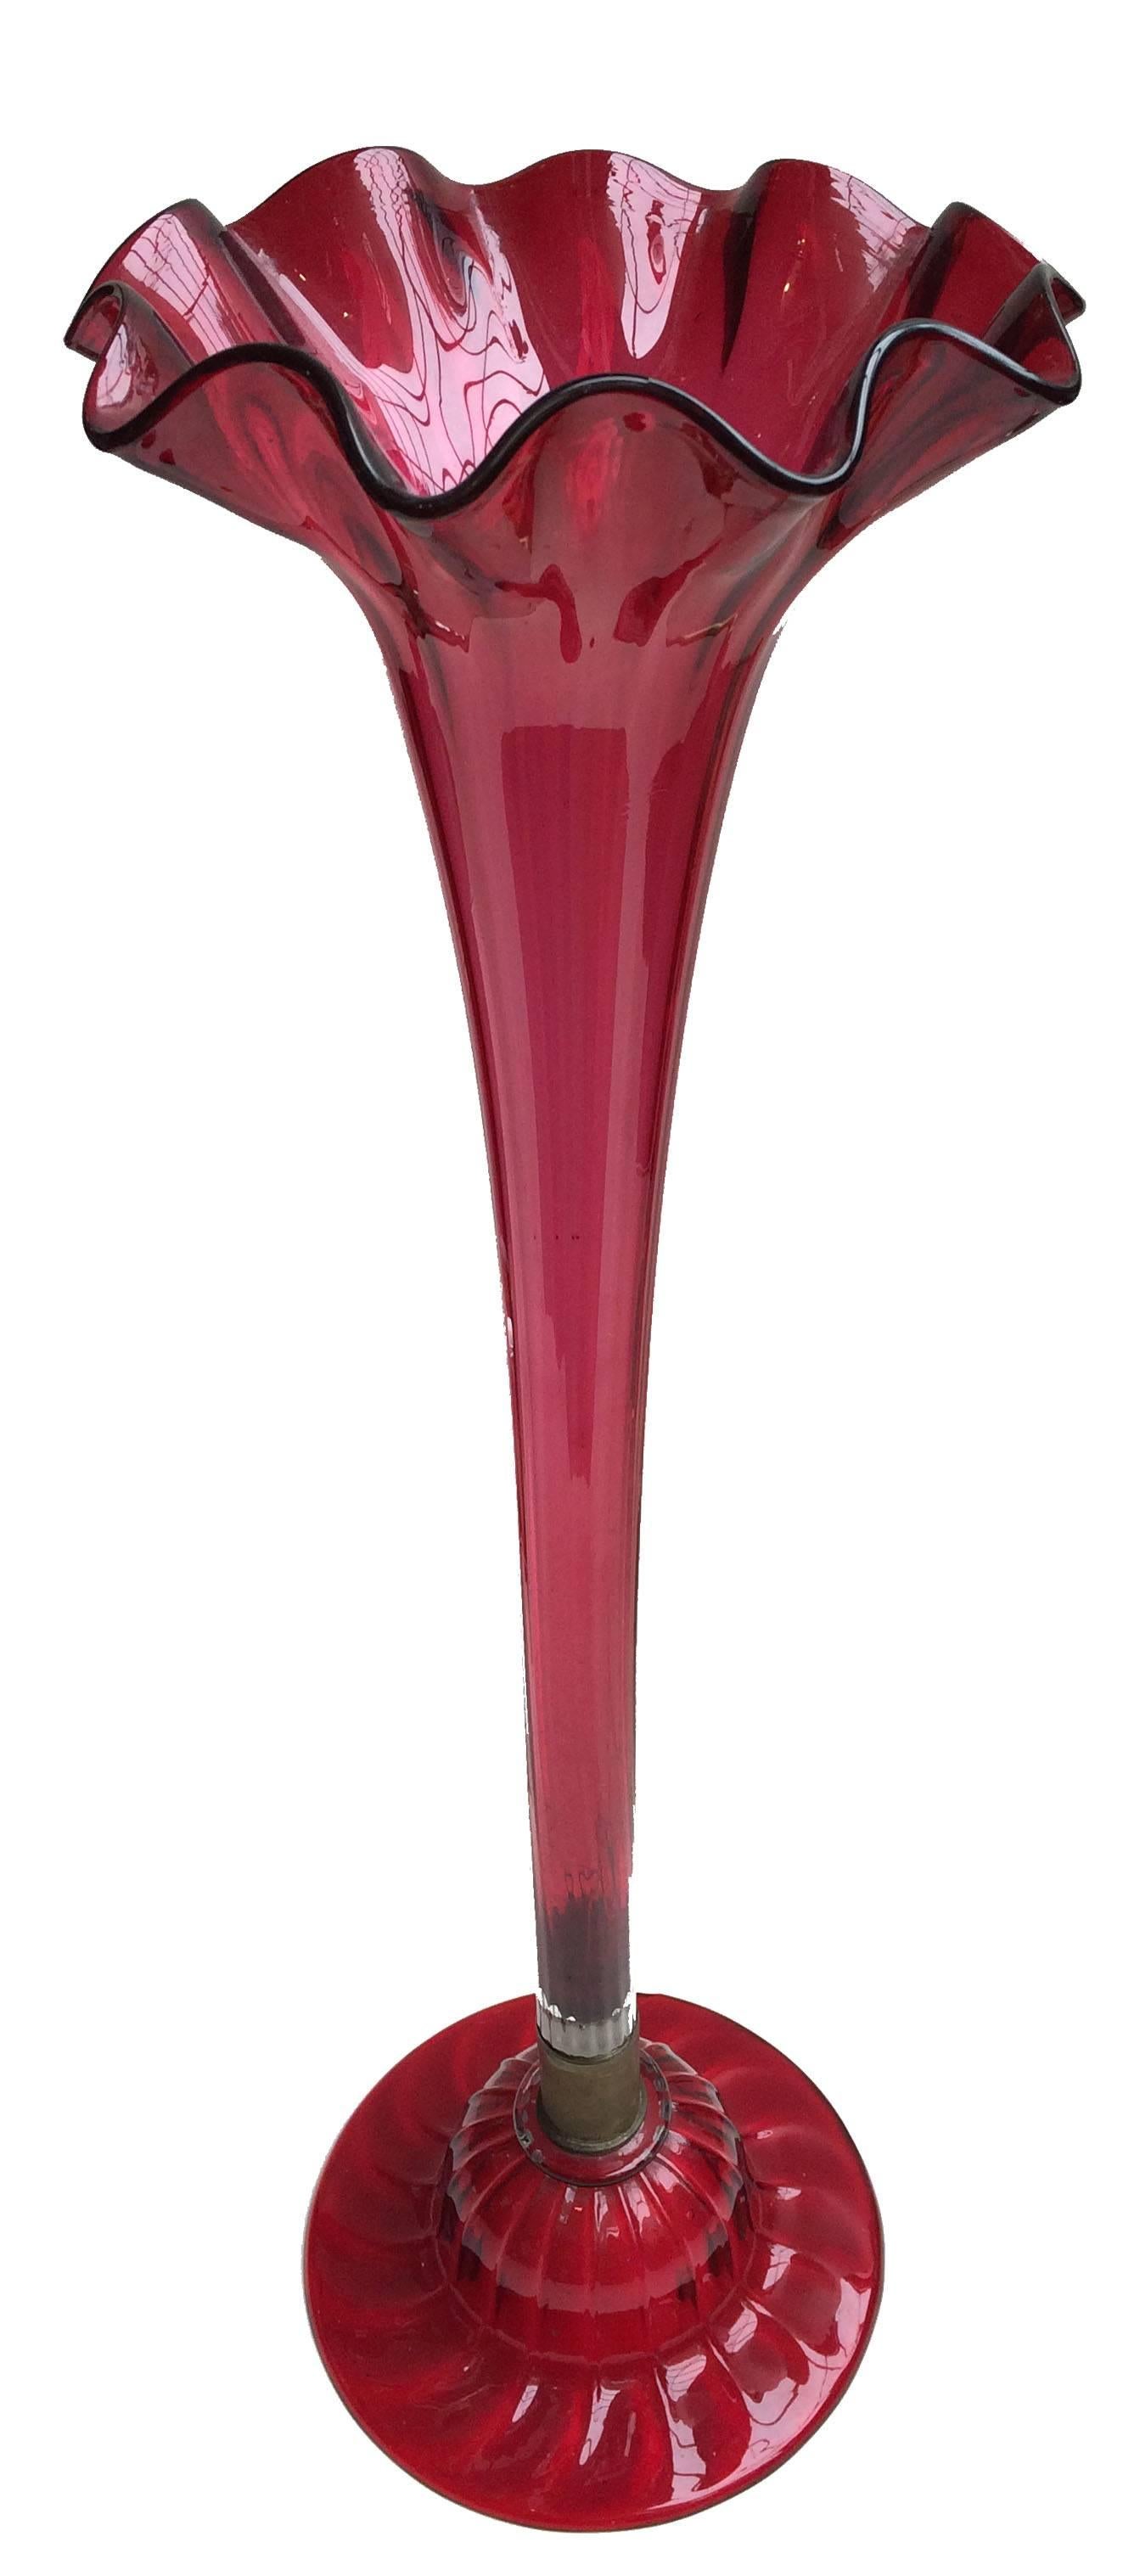 A beautiful single fluted handblown cranberry Epergne, standing 31 inches tall.
Ribbed decoration throughout the glass with fluted top rim.